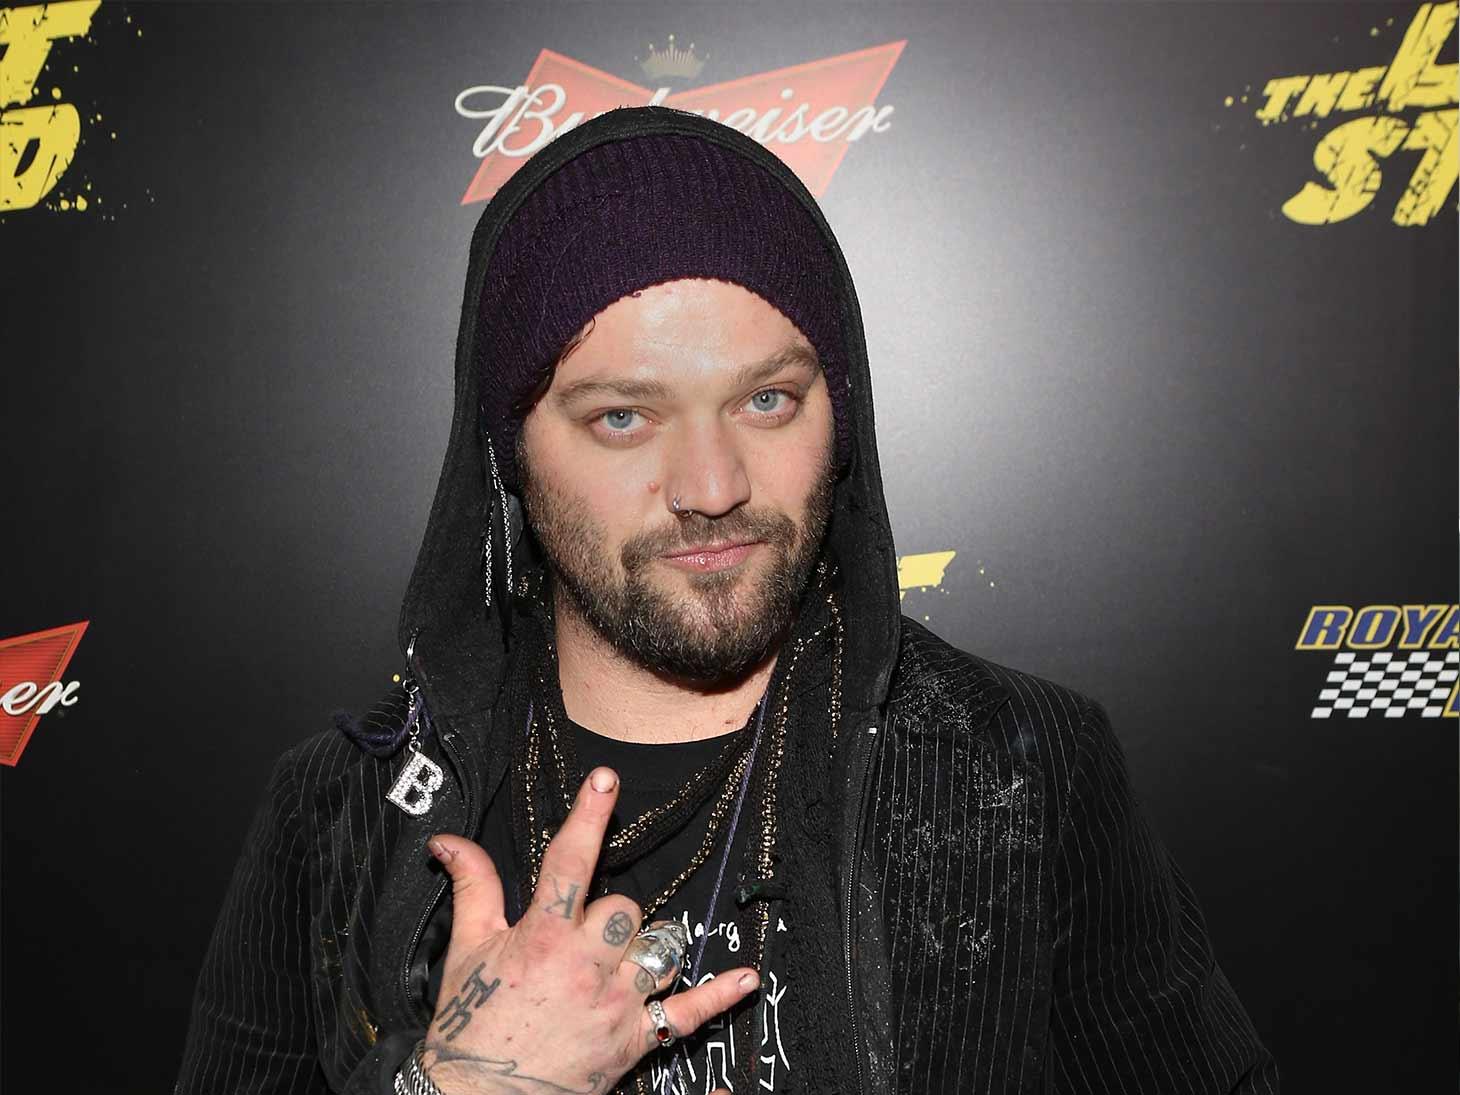 Bam Margera Says He’s Sober, Hints at Trouble with Skateboard Sponsor